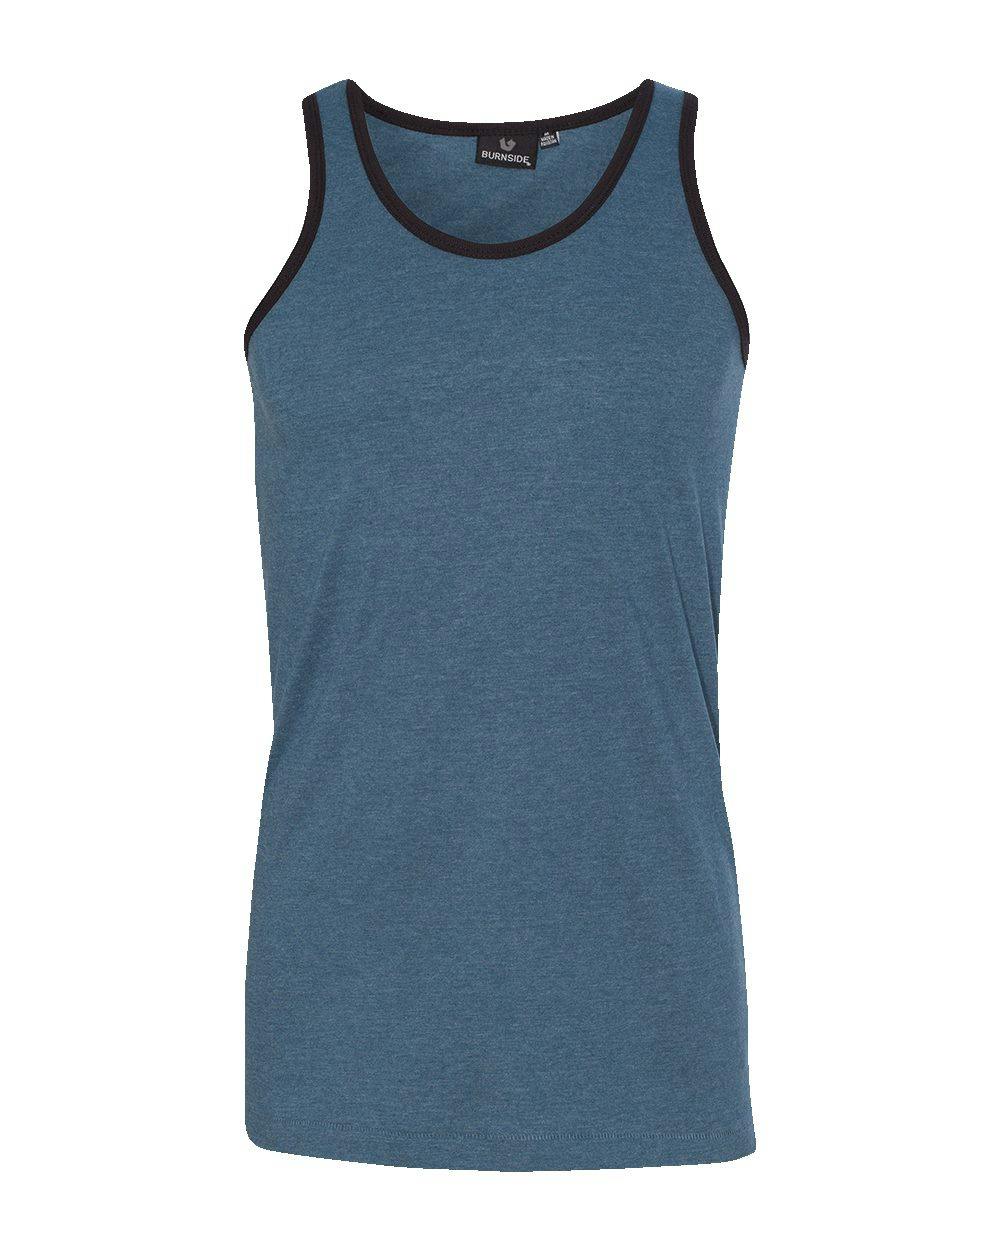 Image for Heathered Tank Top - 9111